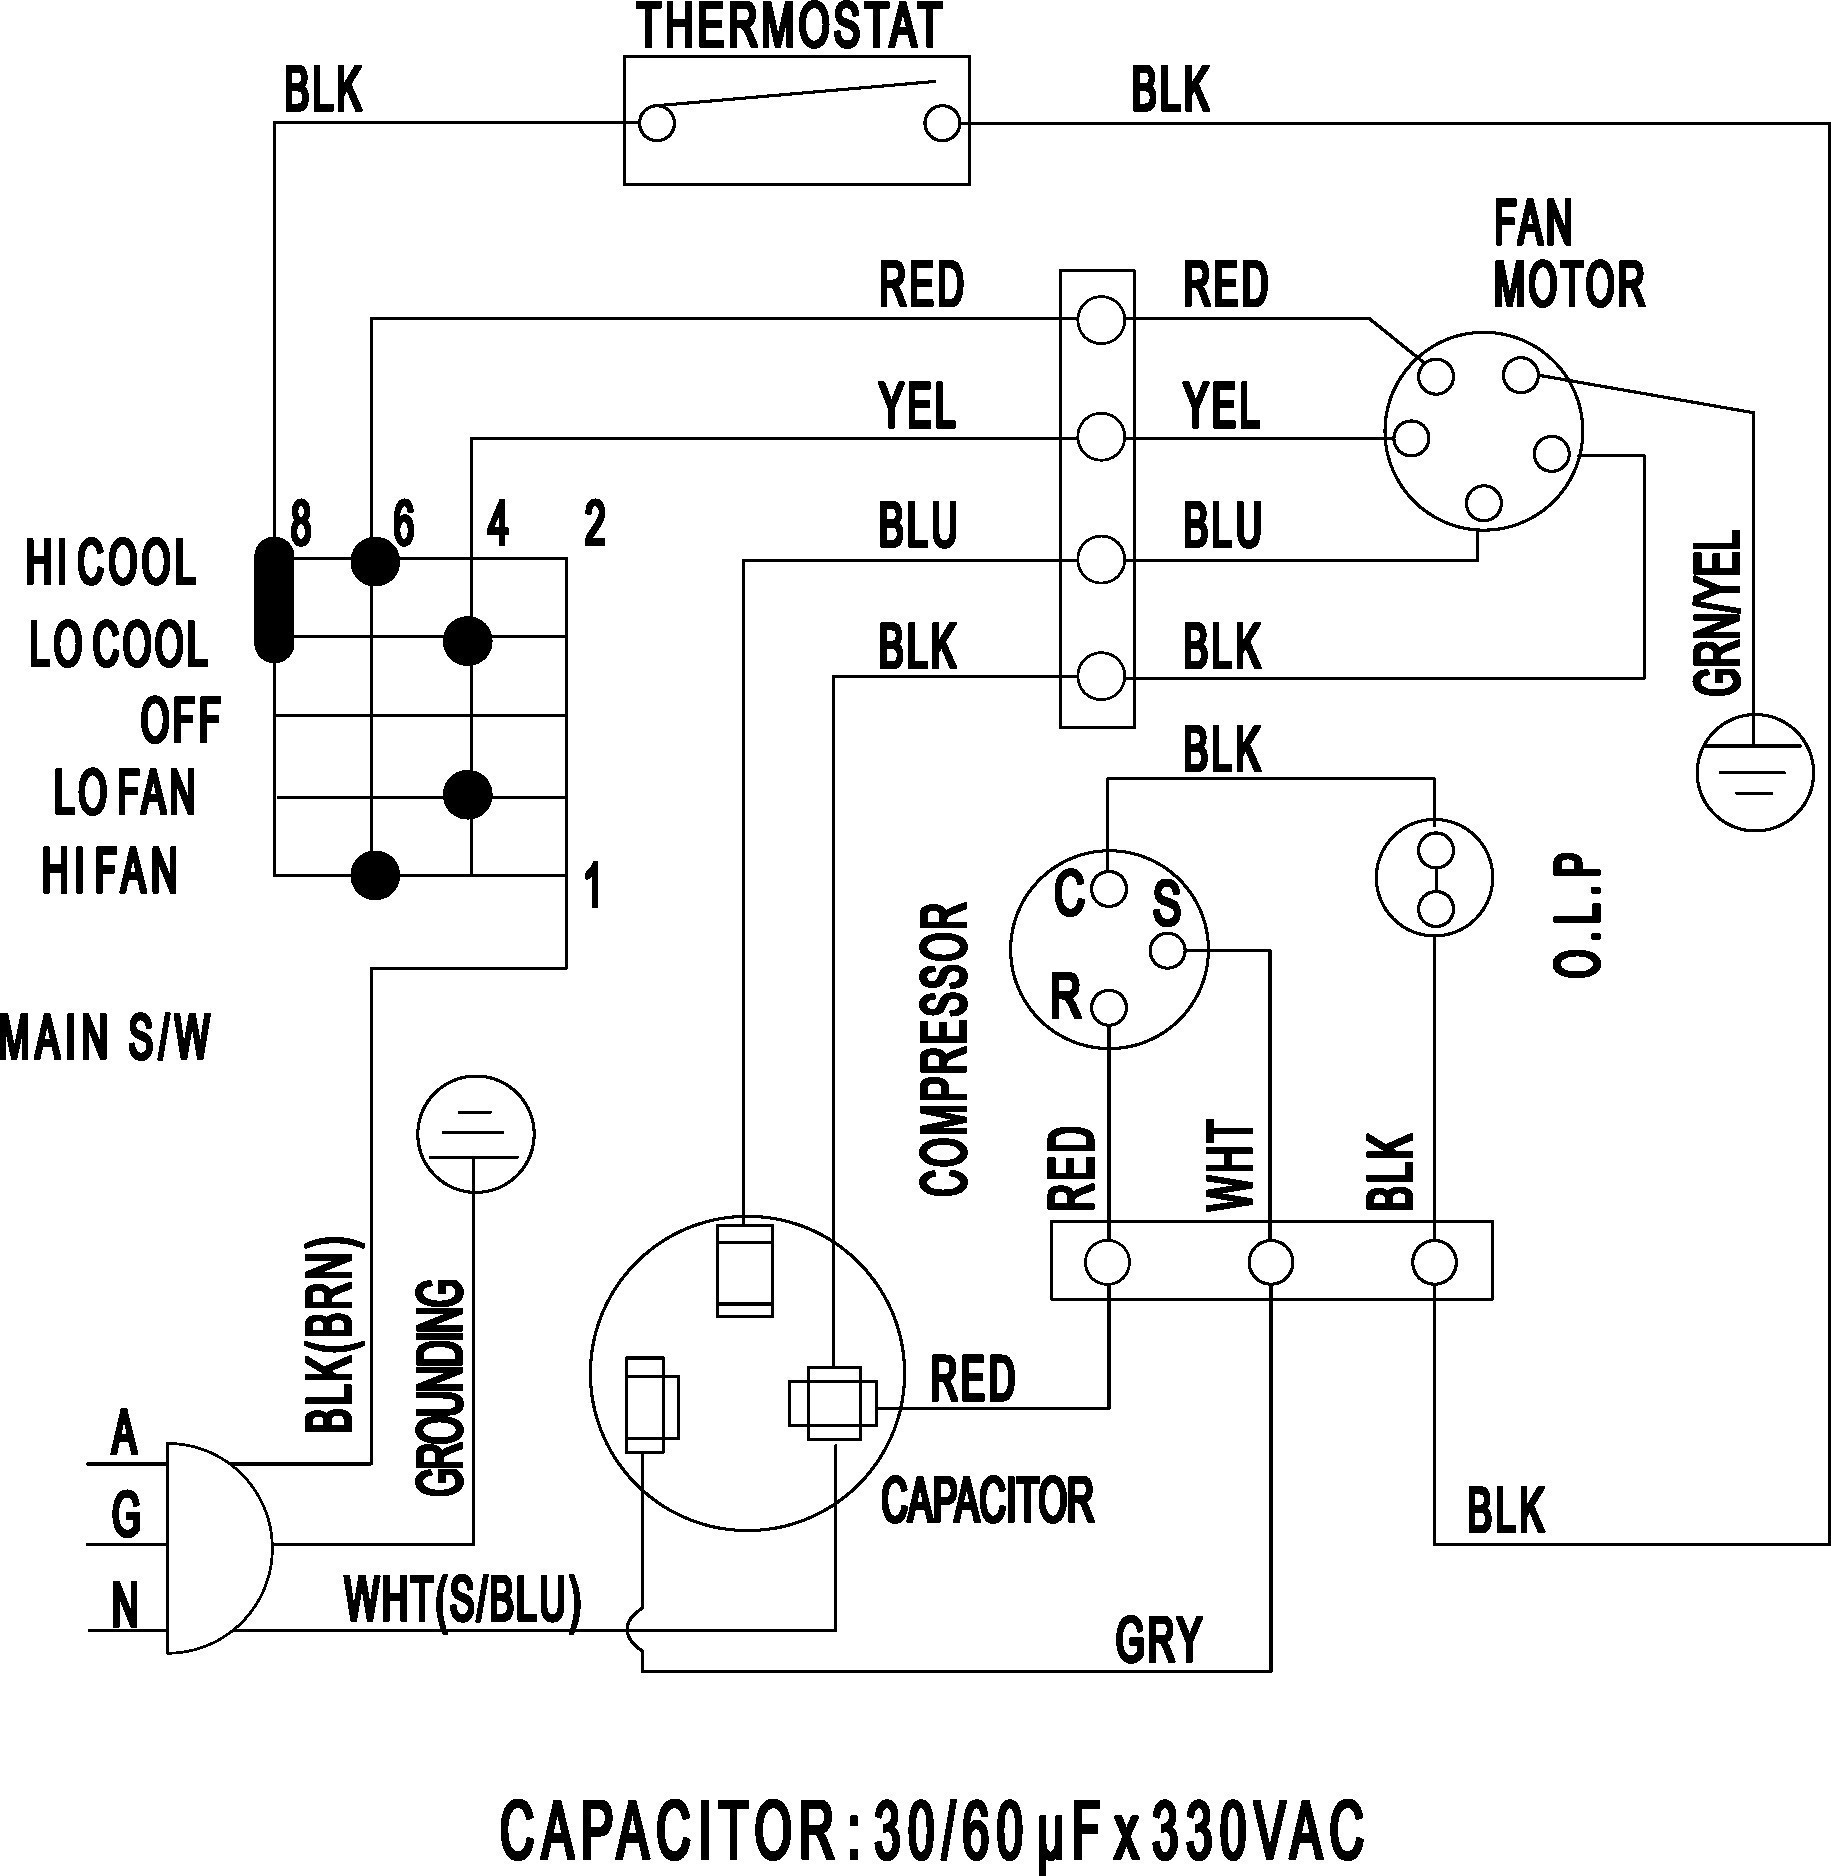 Central Air Conditioner Wiring Diagram Wiring Diagram Air Conditioner Inverter Valid Central Air Of Central Air Conditioner Wiring Diagram